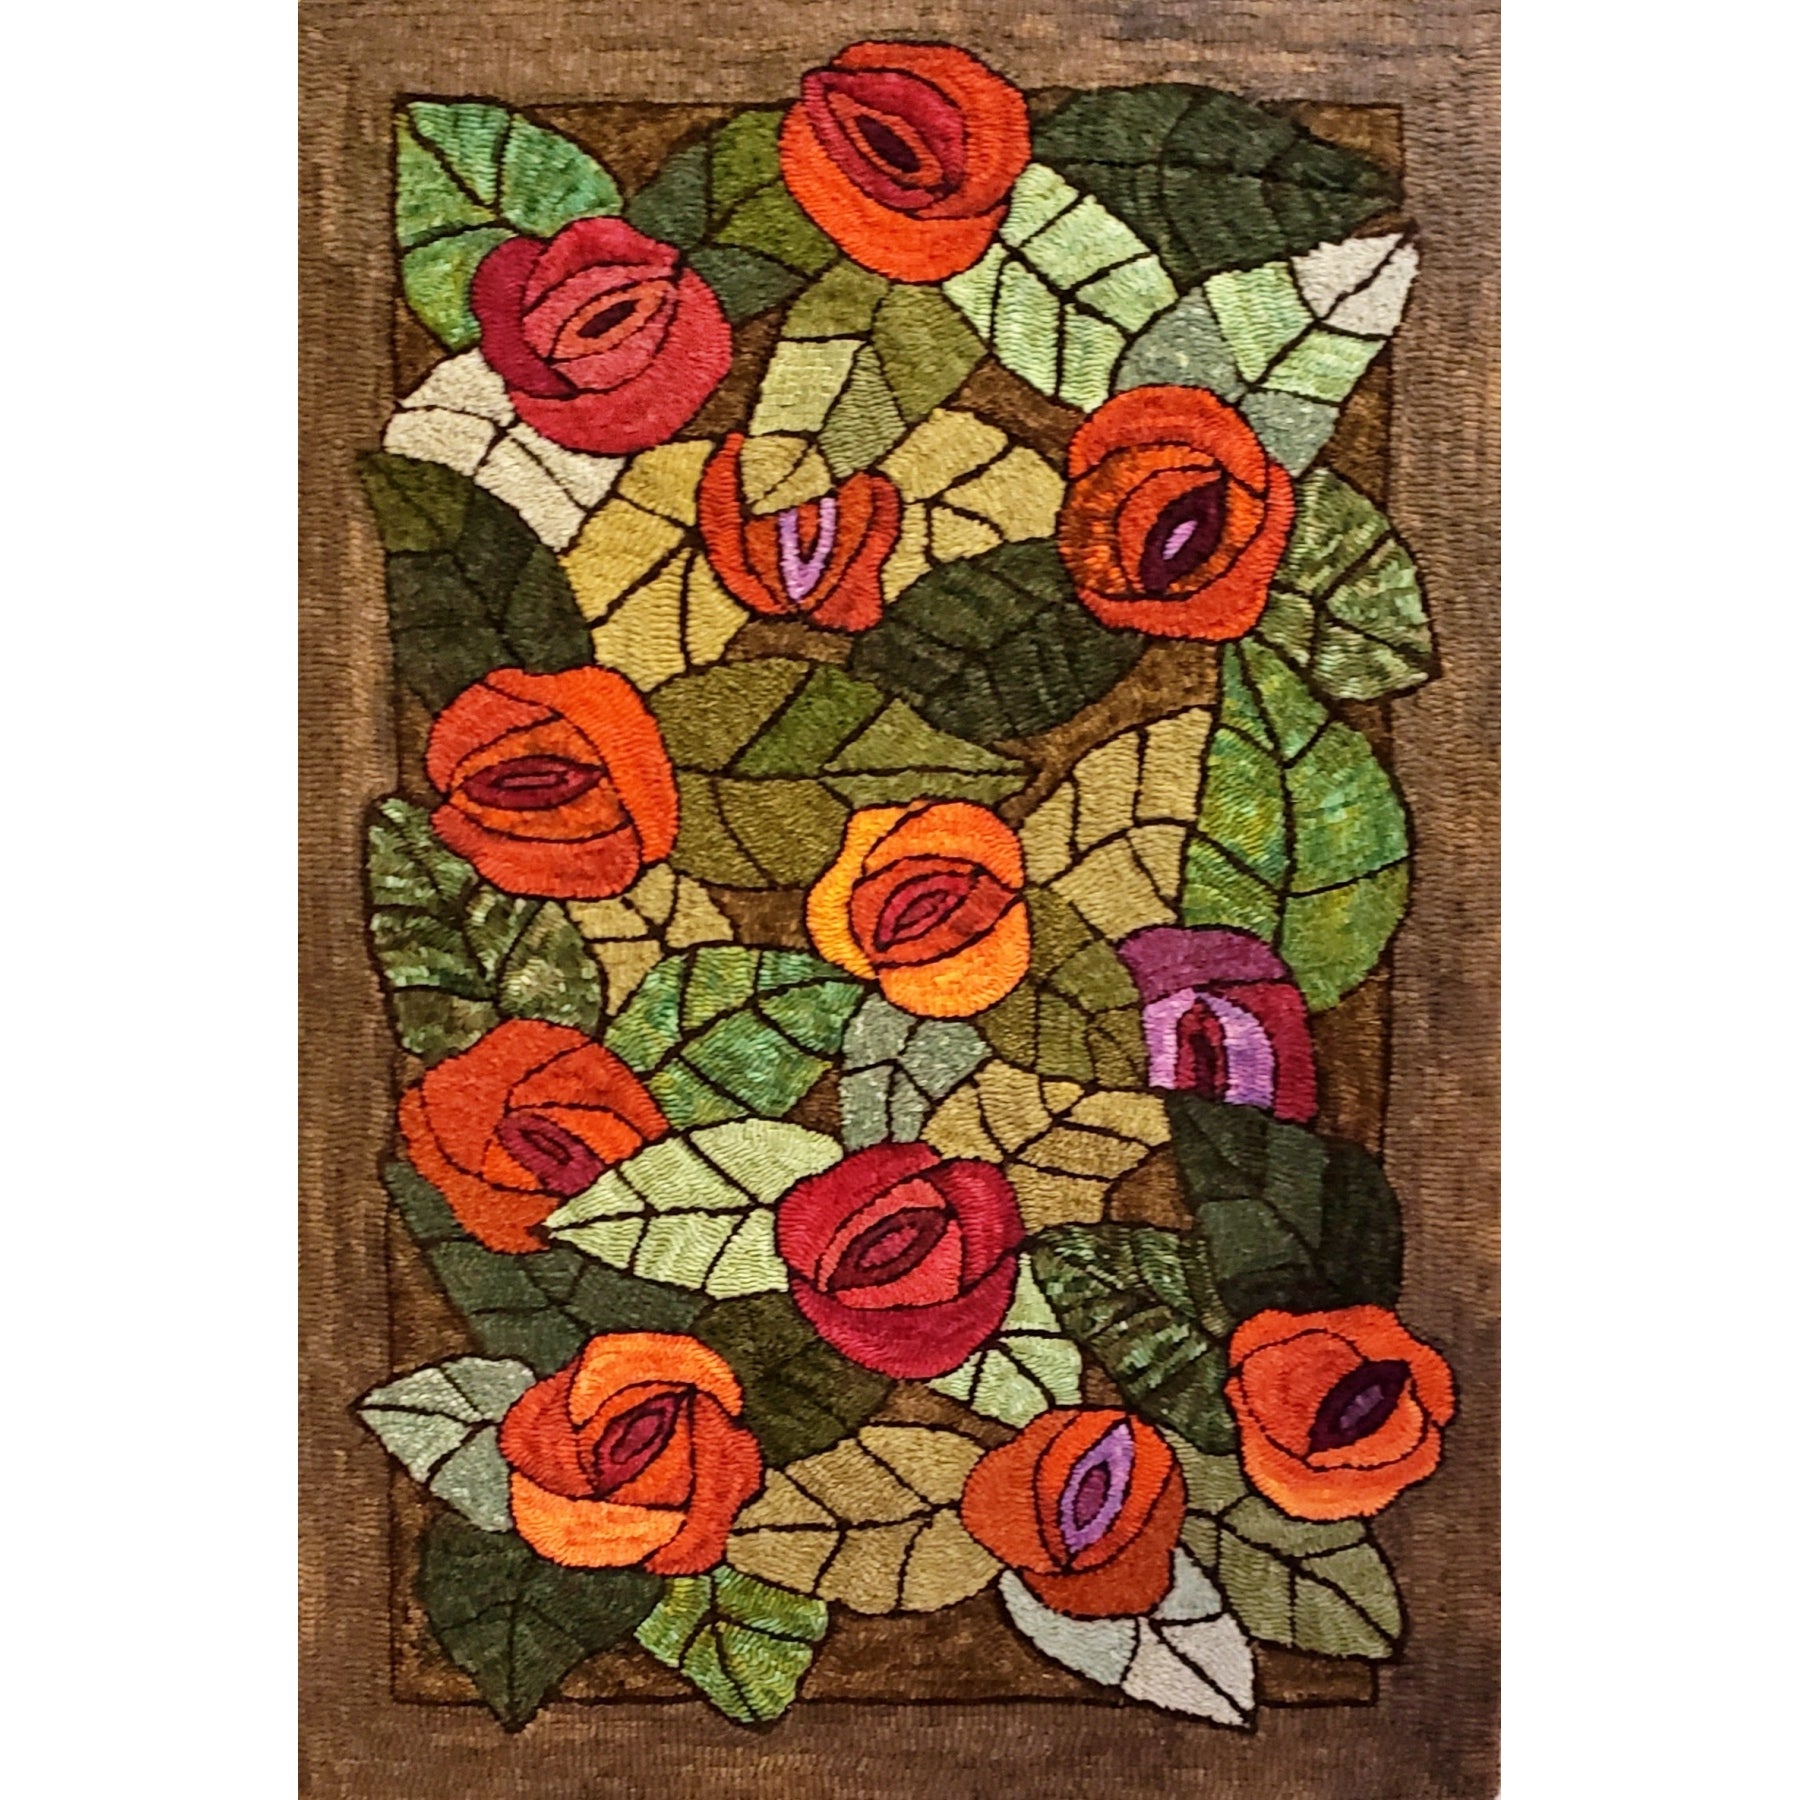 A Dozen Roses, rug hooked by Terryl Ostmo